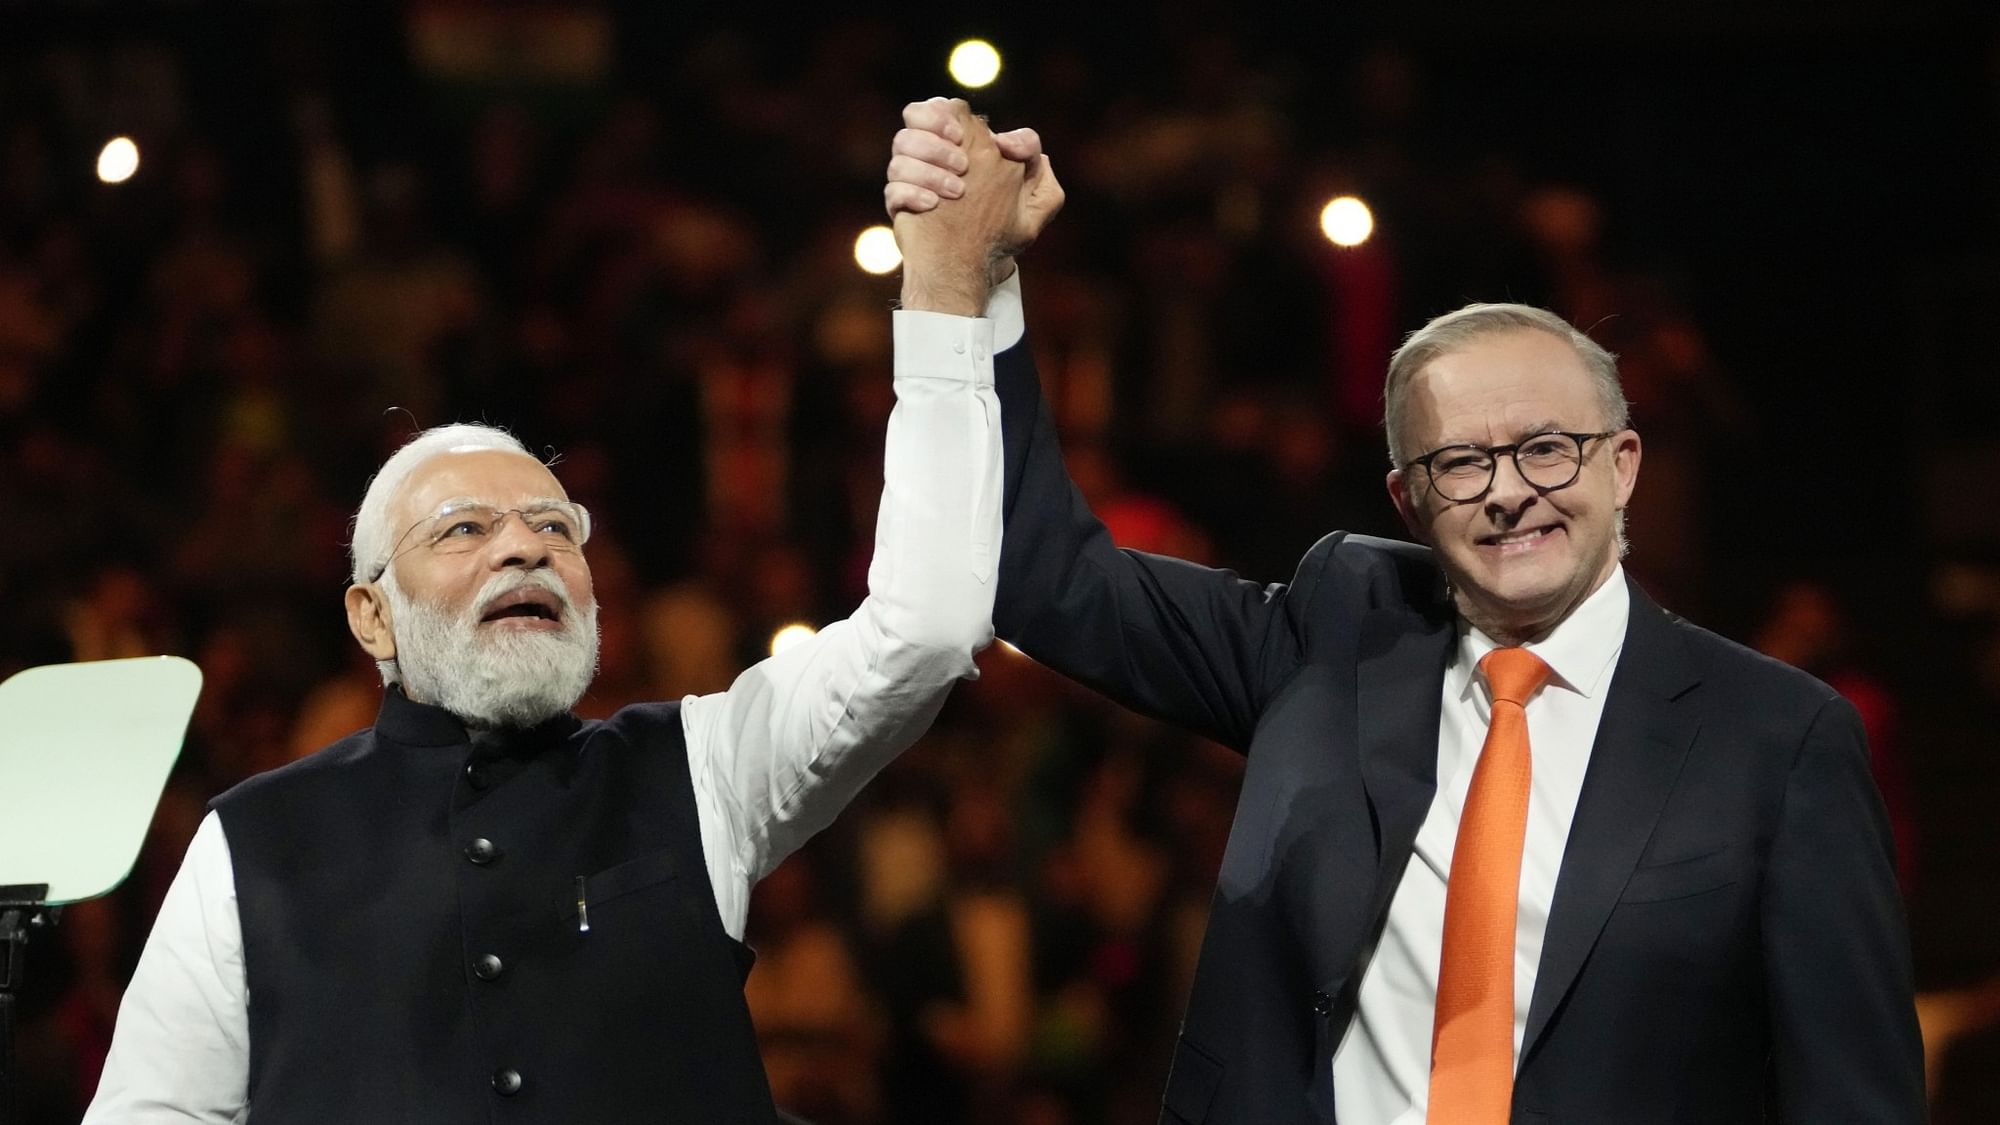 <div class="paragraphs"><p>Indian Prime Minister Narendra Modi, left, holds hands with his Australian counterpart Anthony Albanese during an Indian community event at Qudos Bank Arena in Sydney, Australia on Monday, 23 May.</p></div>